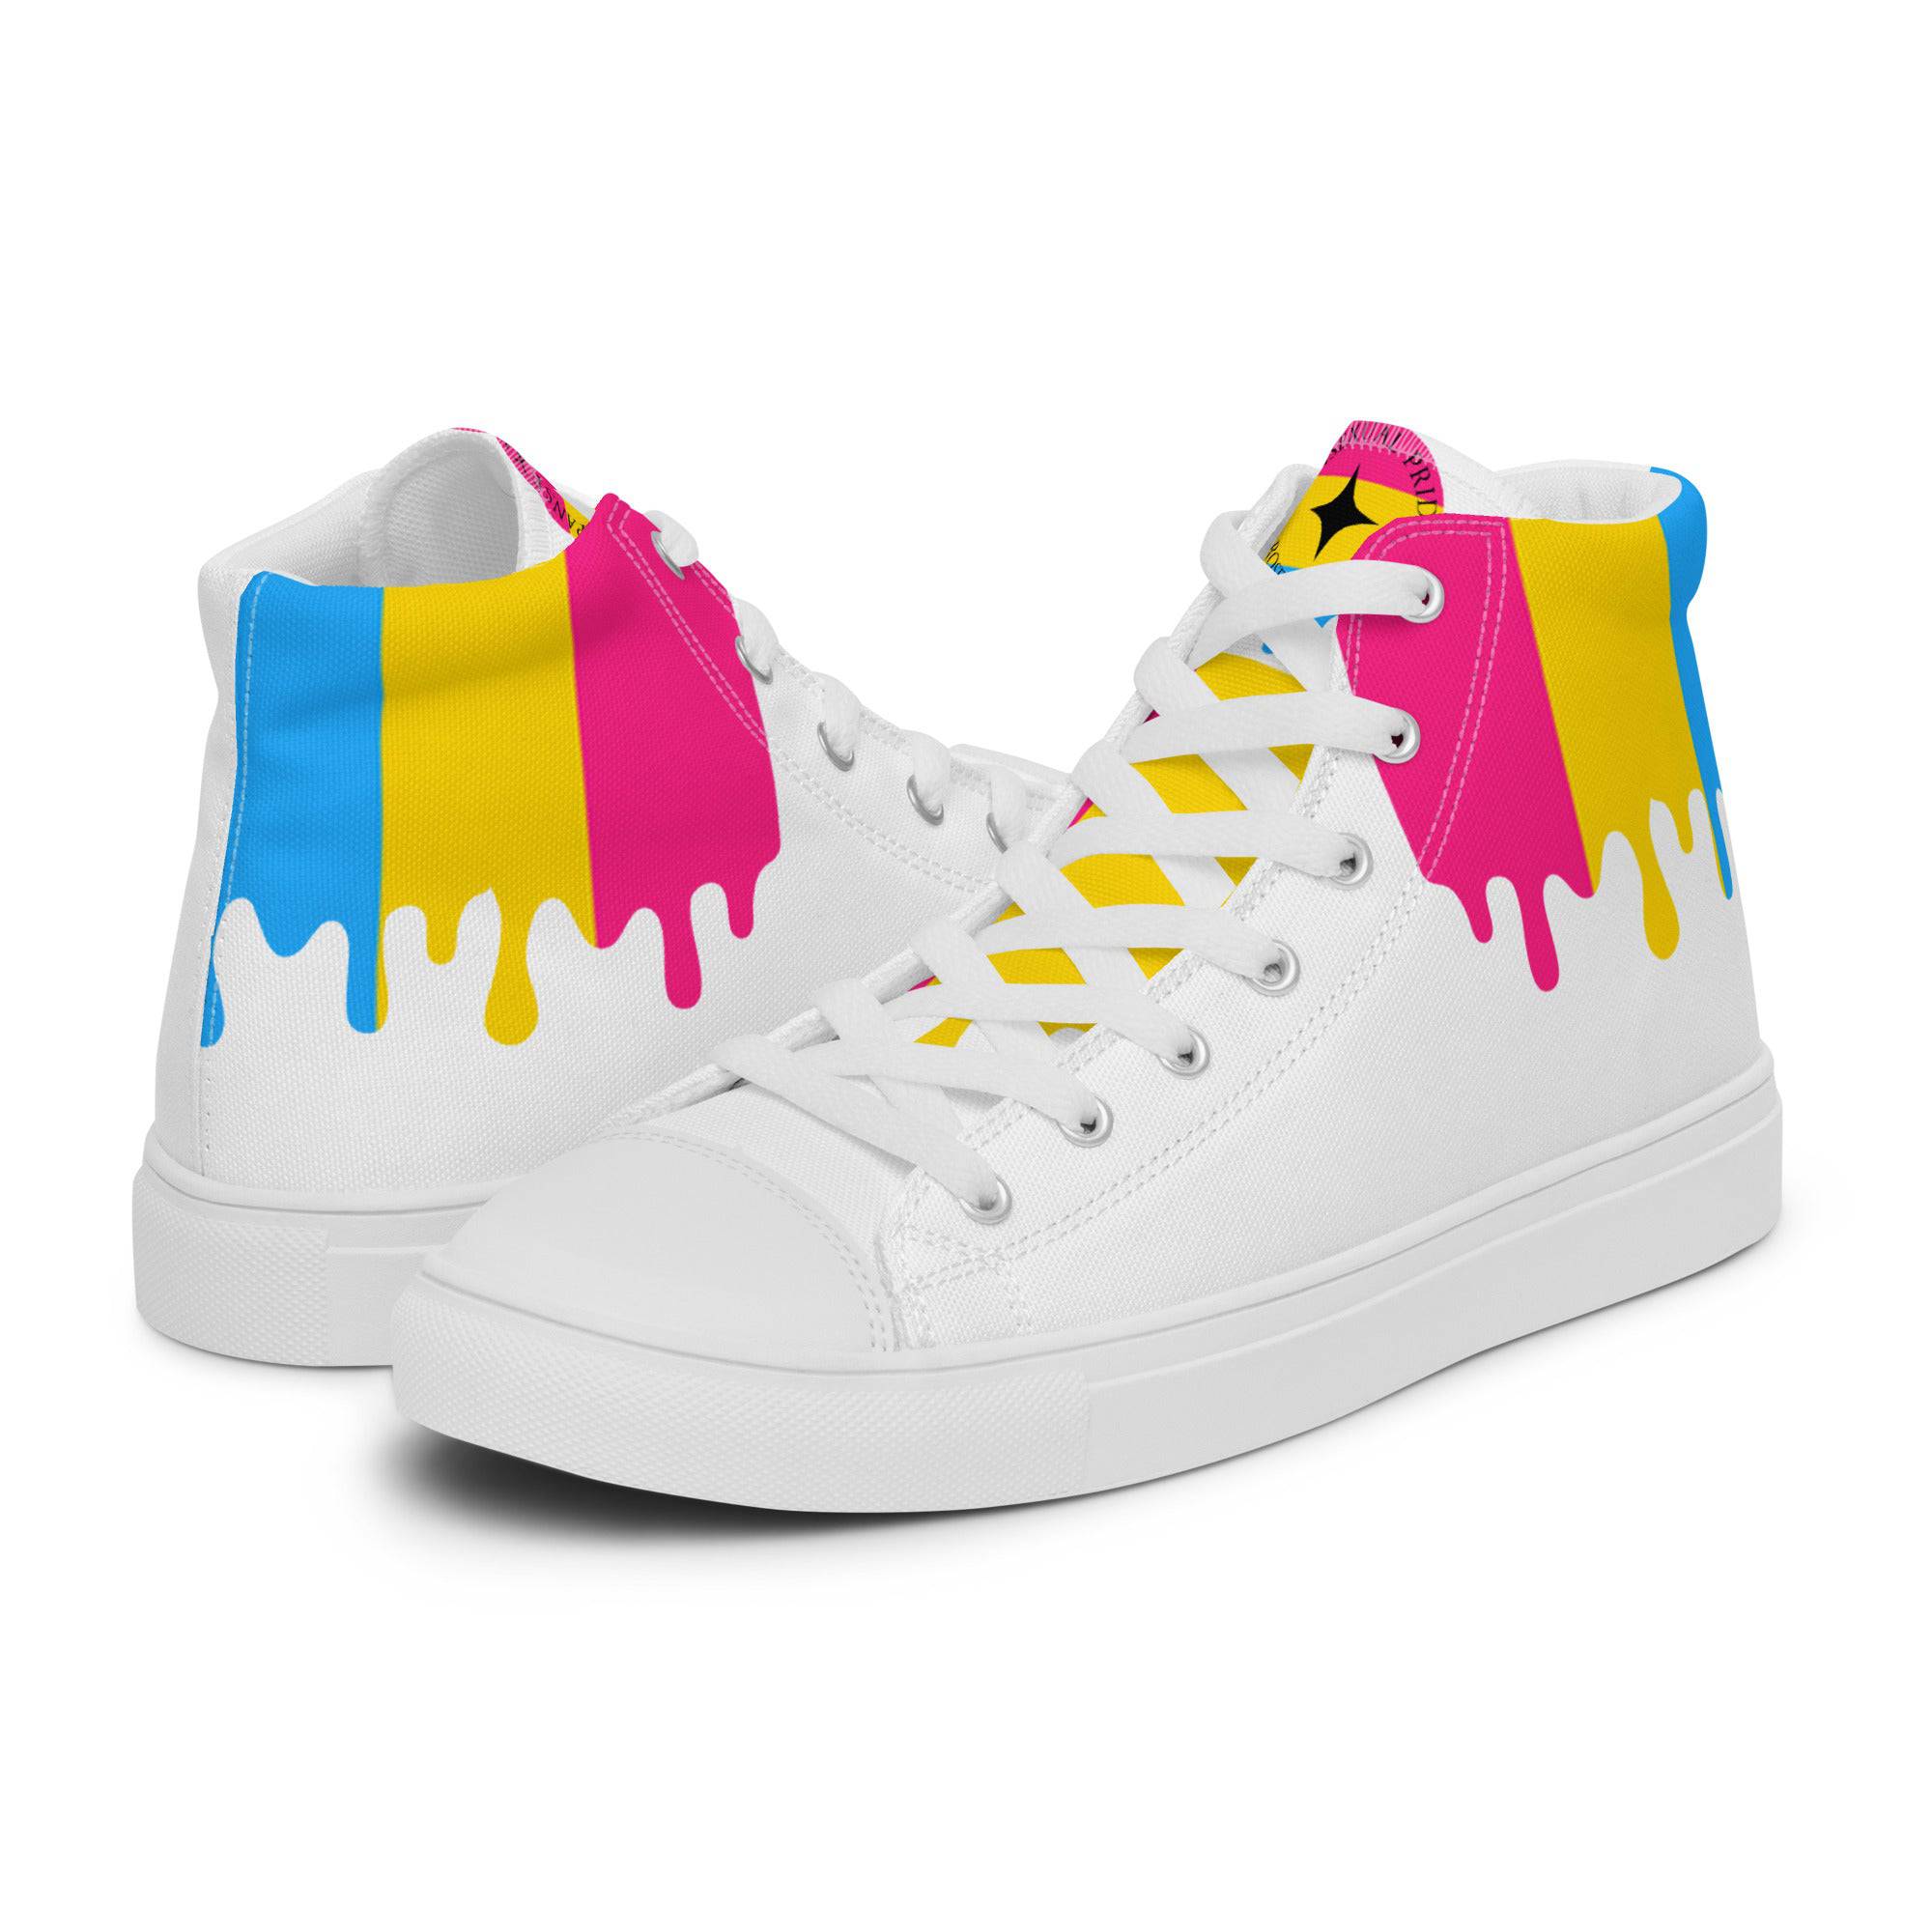 Pansexual Melting Pride Women’s high top shoes - Rose Gold Co. Shop